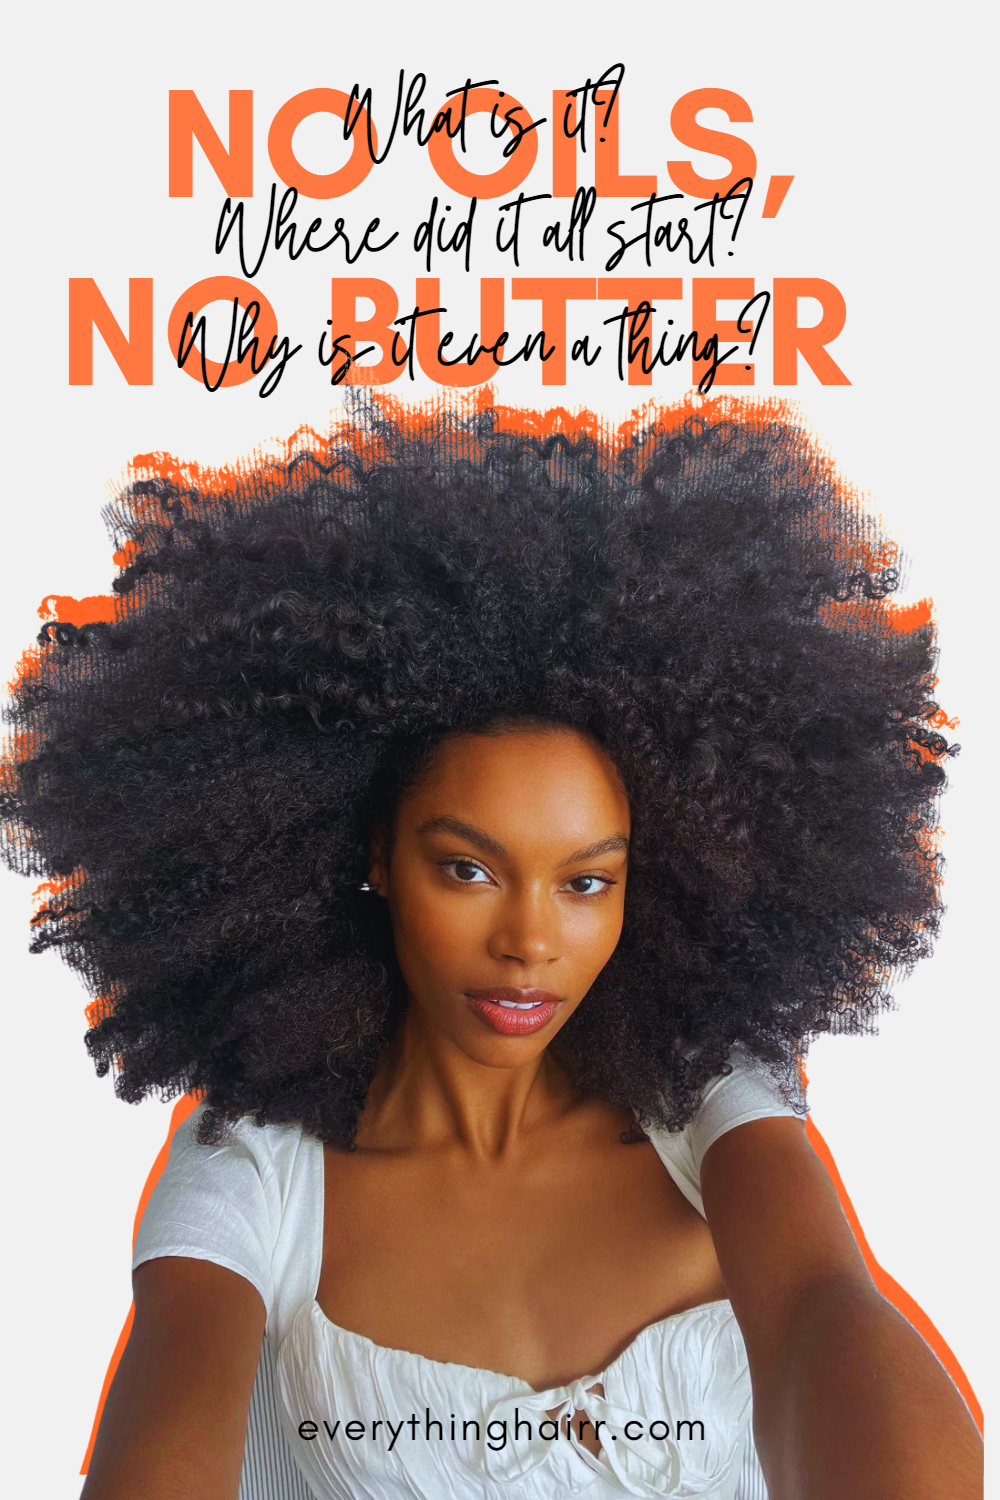 Everything Hairr- Hair Inspiration and Education for all Black hair types